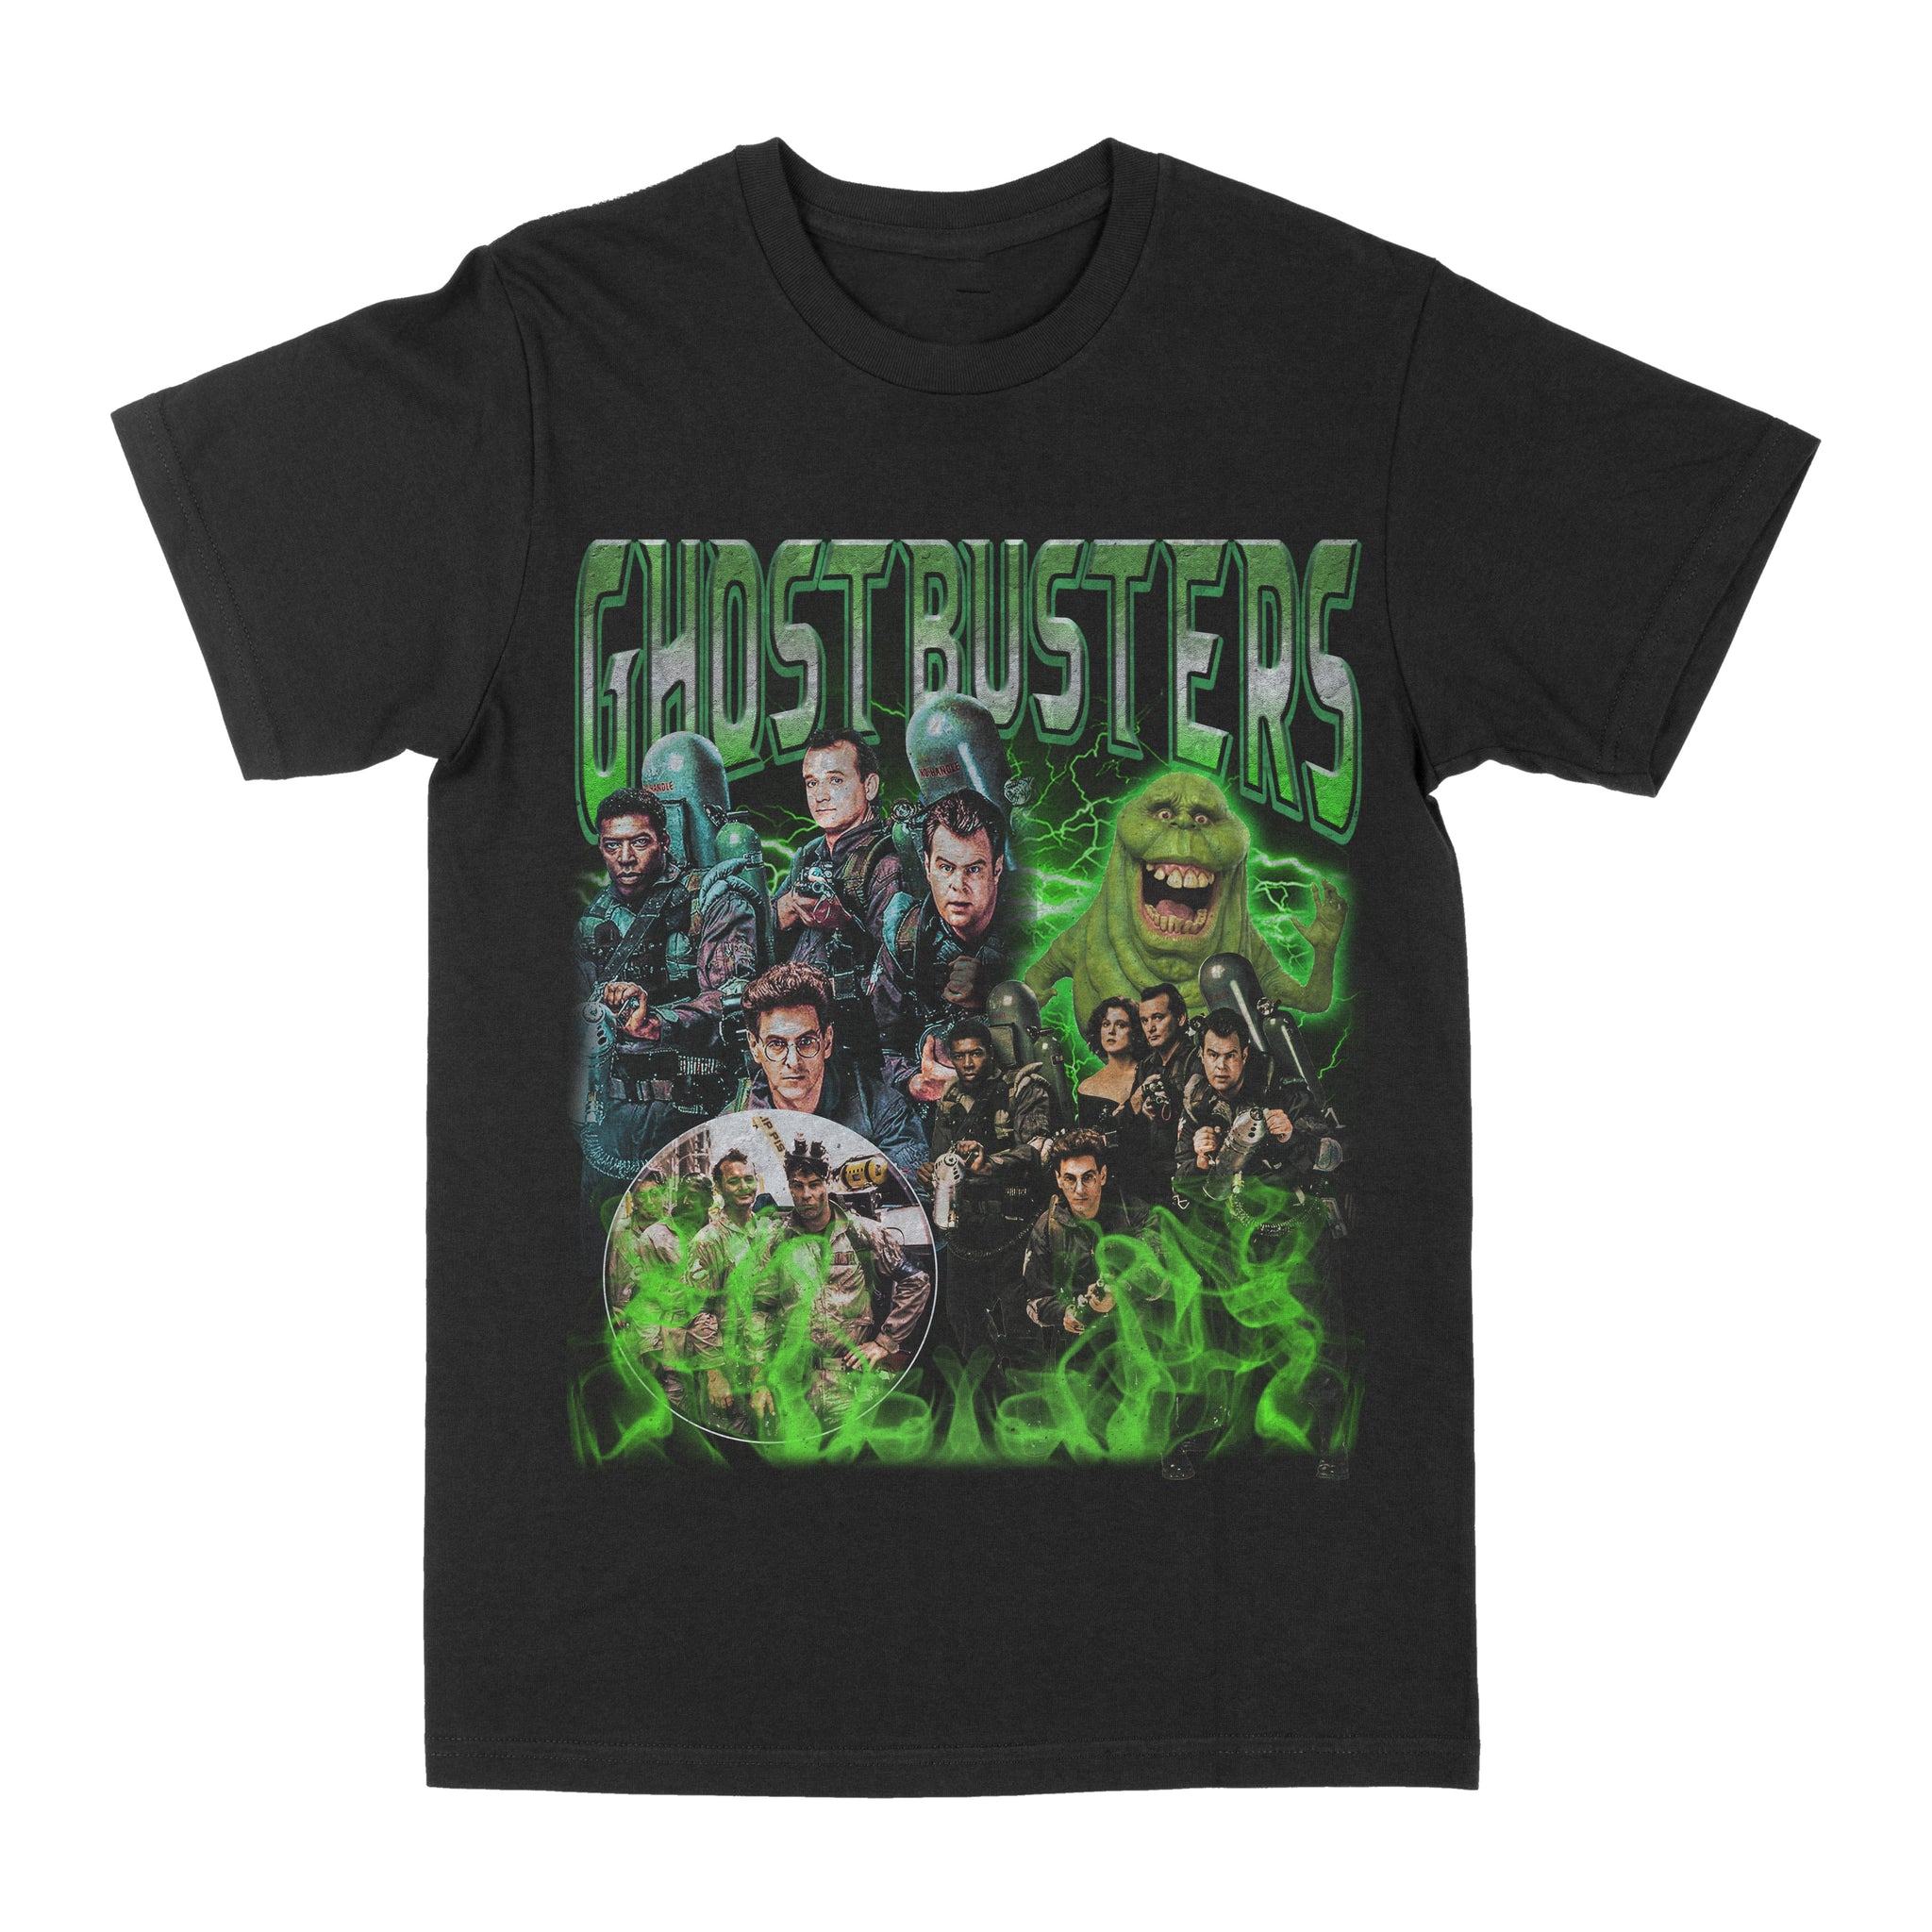 Ghostbusters Graphic Tee